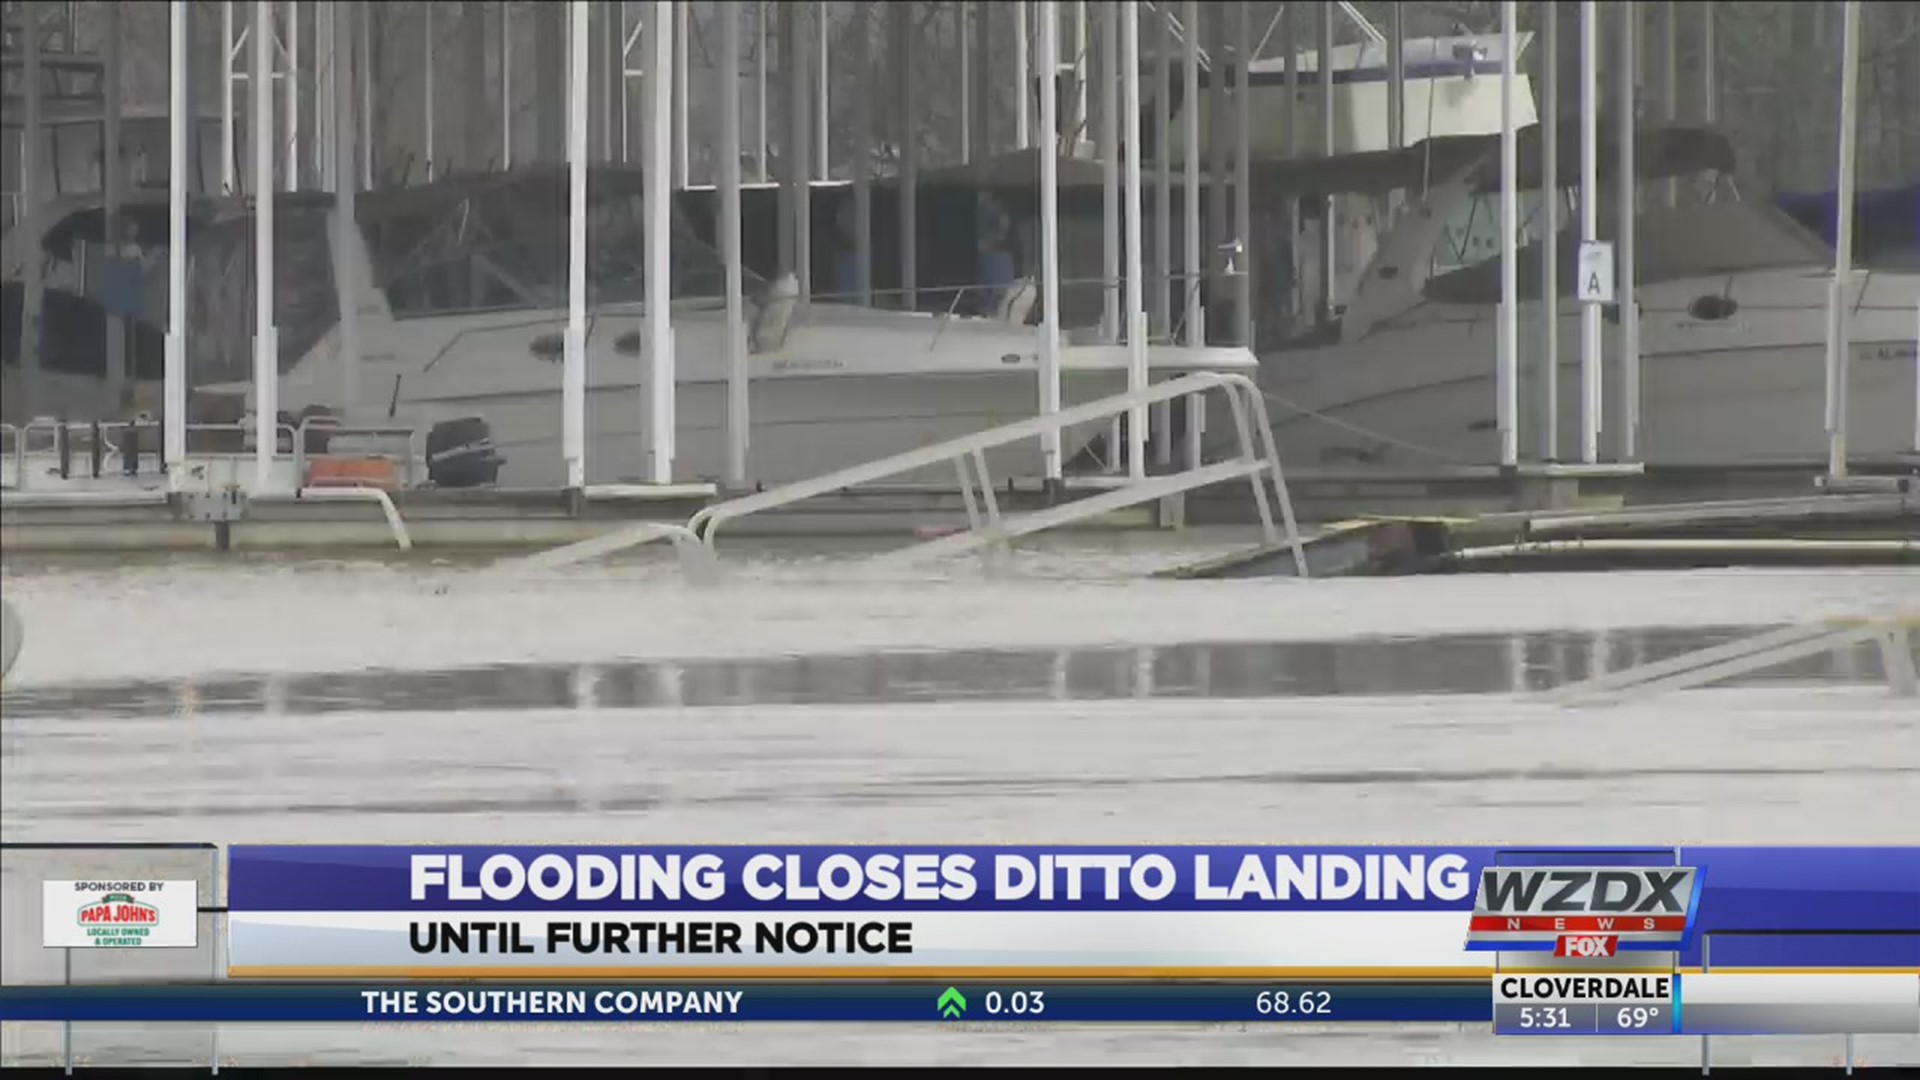 The severe flooding continues and has caused several parks to close, including Ditto Landing in Huntsville. On Friday, campers were evacuated from the campground, and the marina was shut down. Grassy areas and parking lots are completely covered by water at the marina.